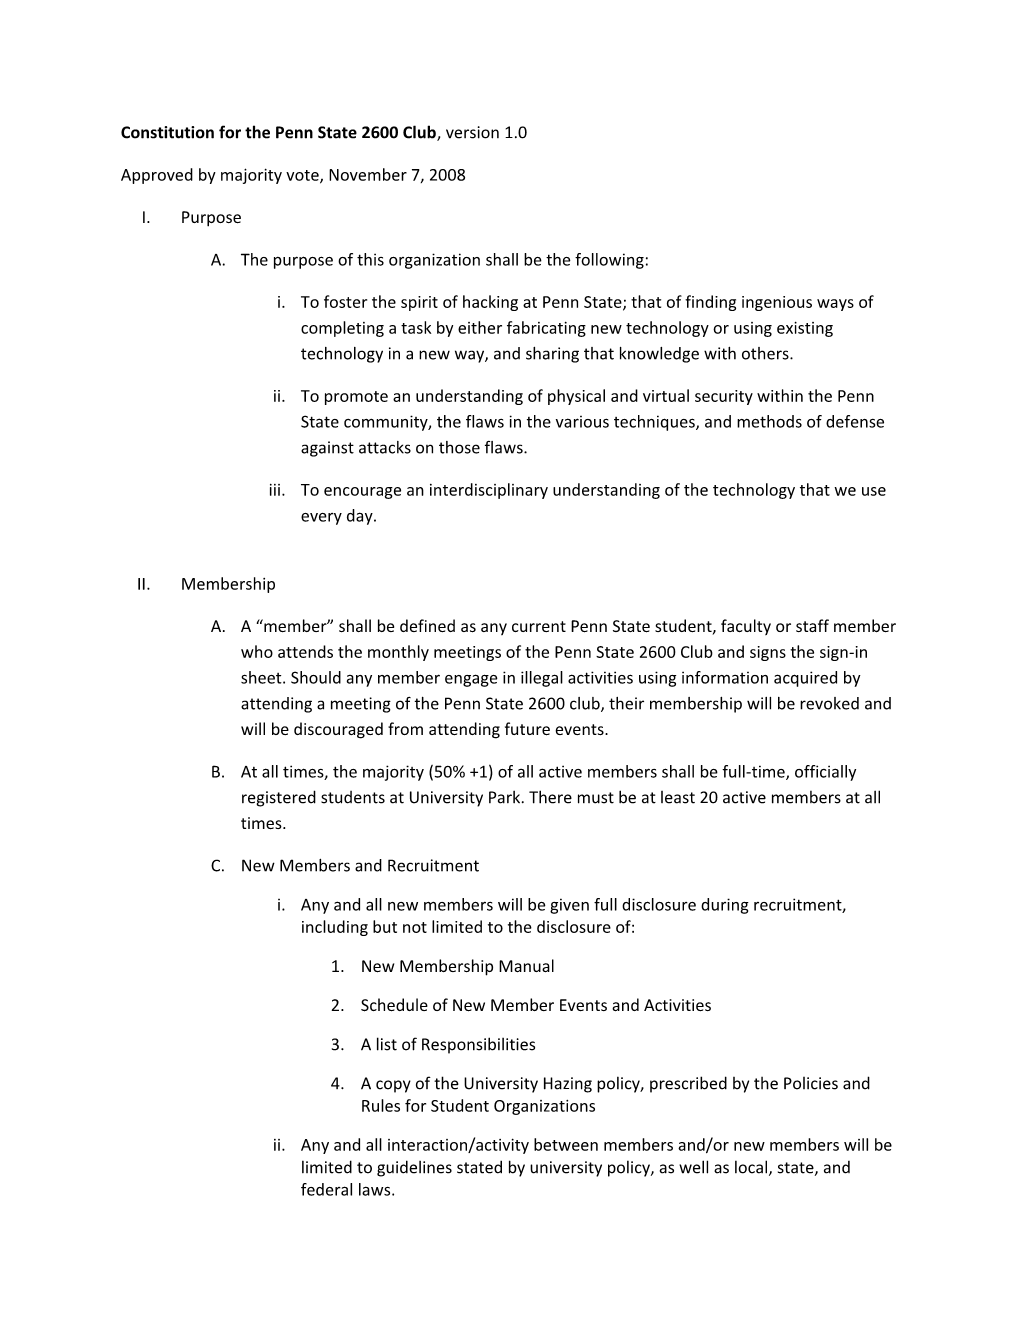 Constitution for the Penn State 2600 Club , Version 1.0